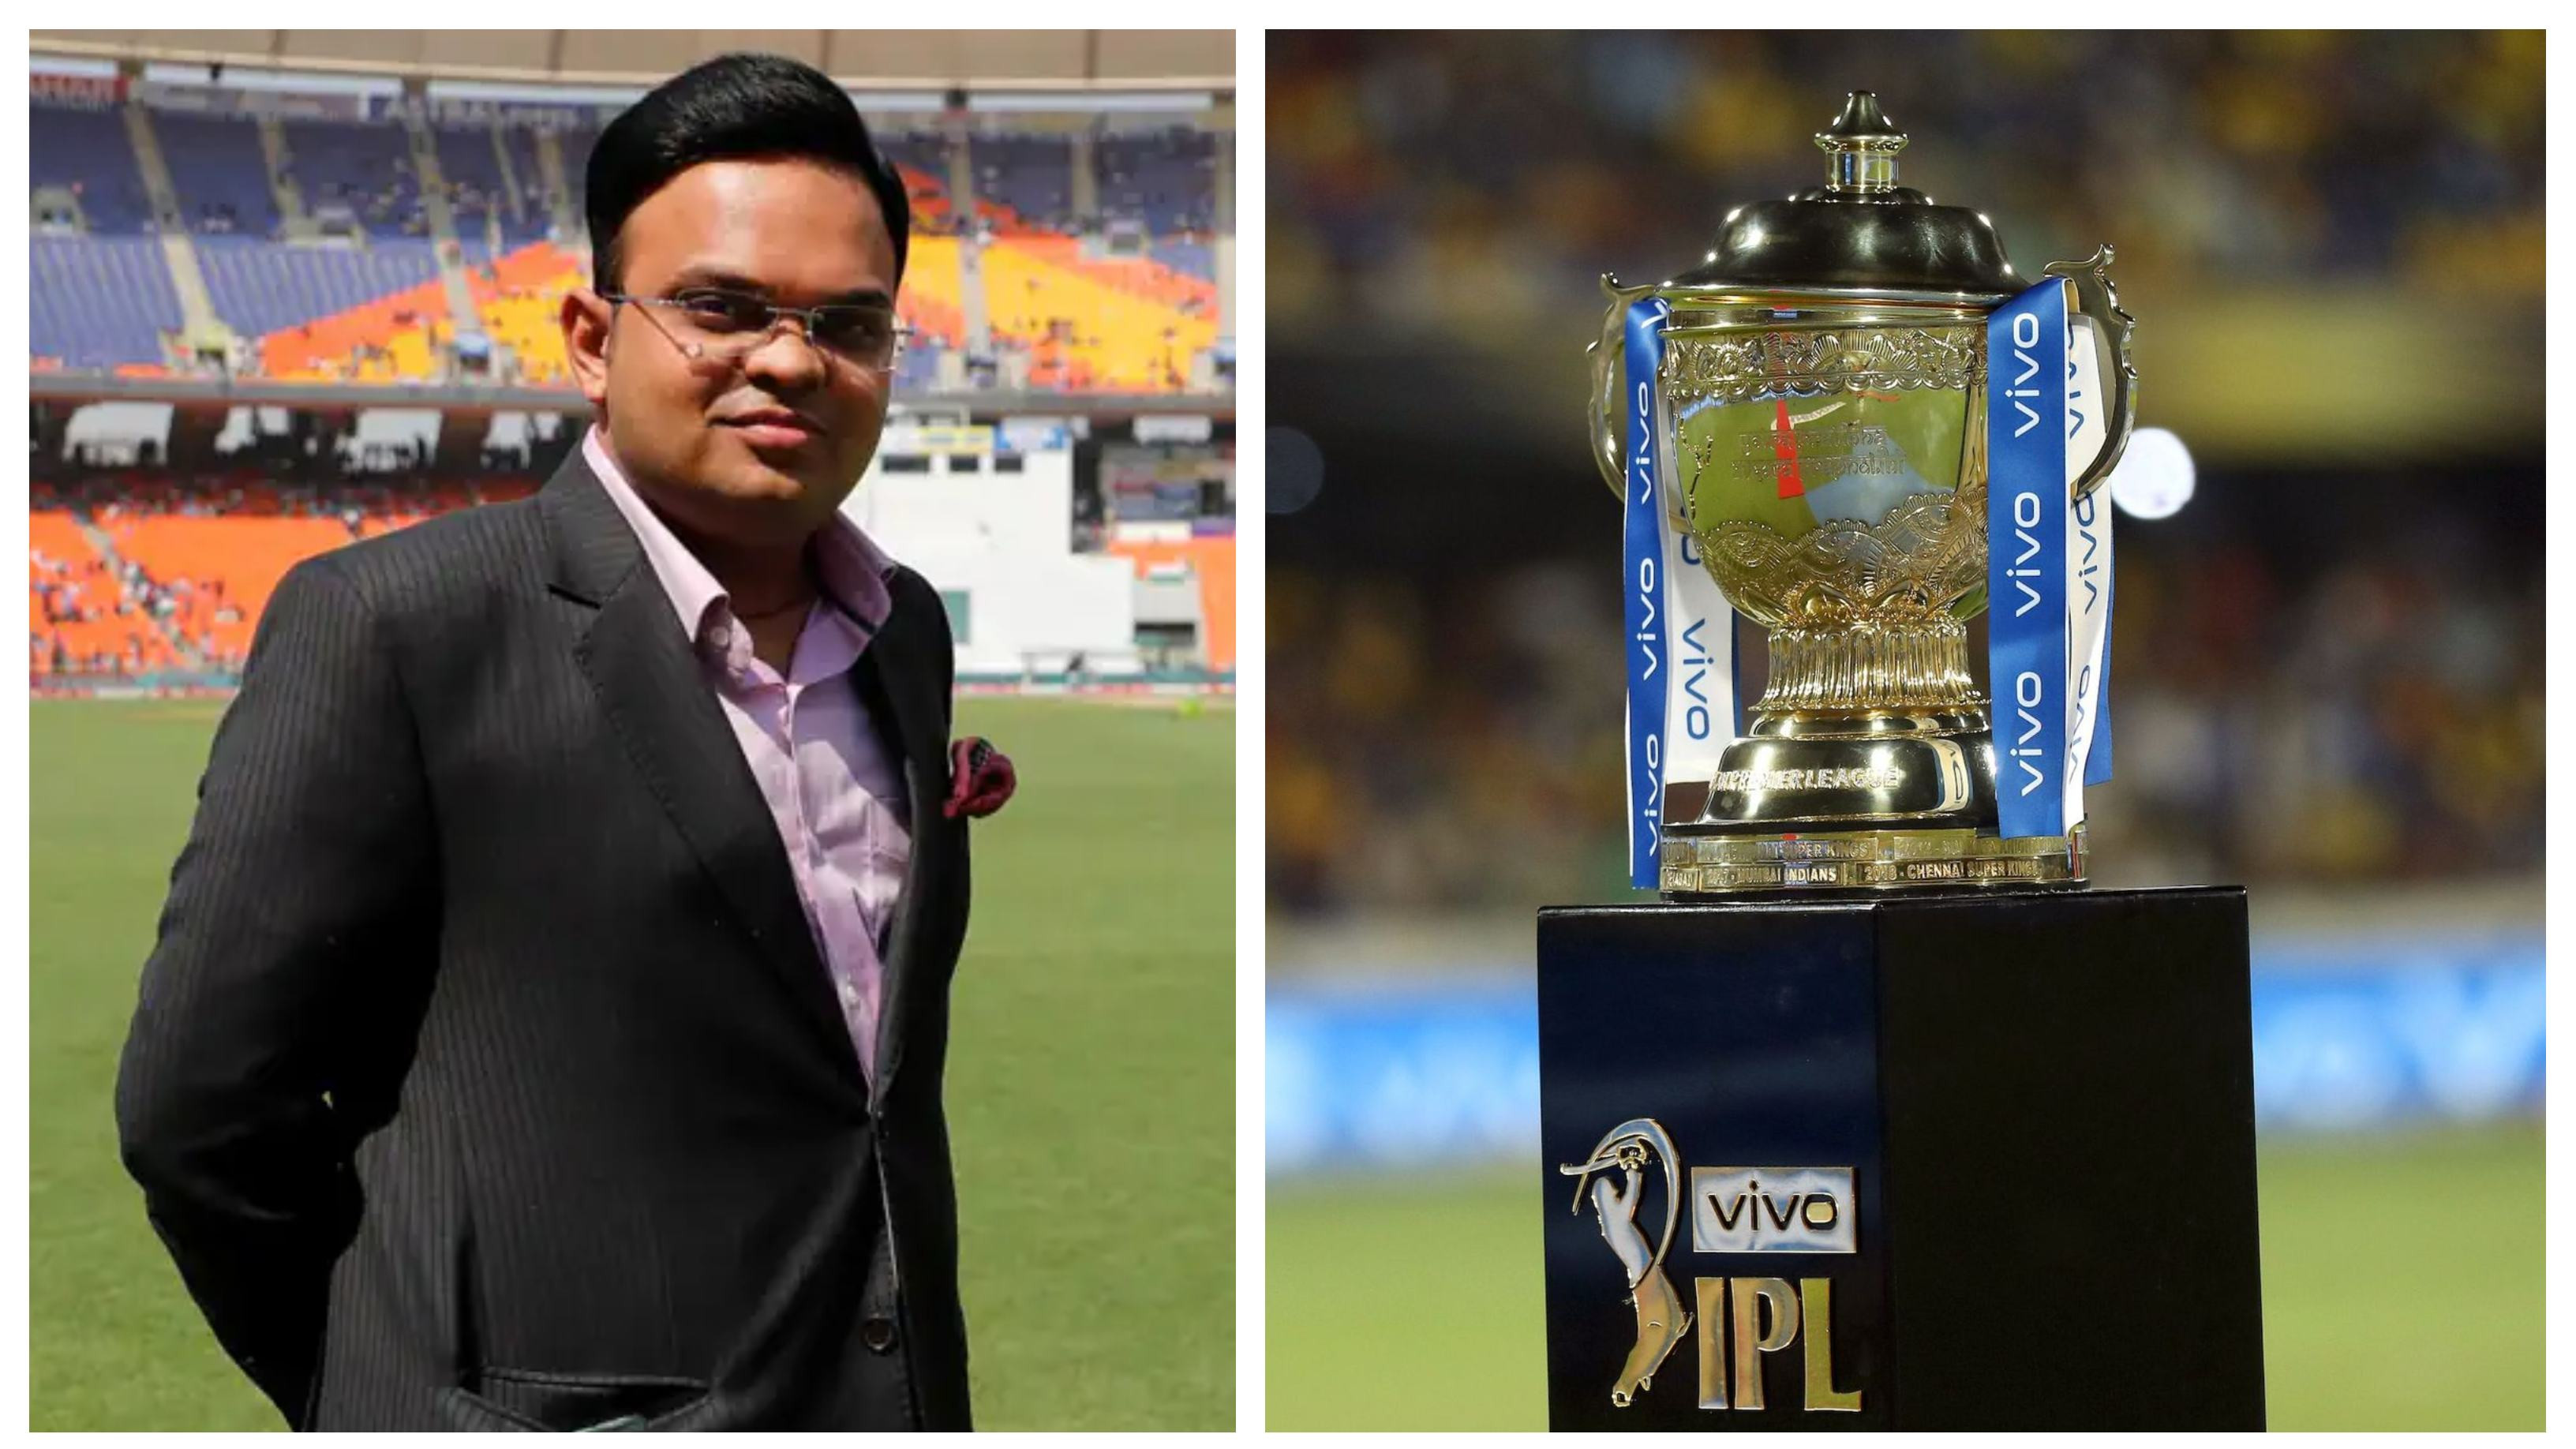 IPL 2021: Second leg of IPL 14 to be held in UAE due to ‘weather restrictions’ in India, says Jay Shah